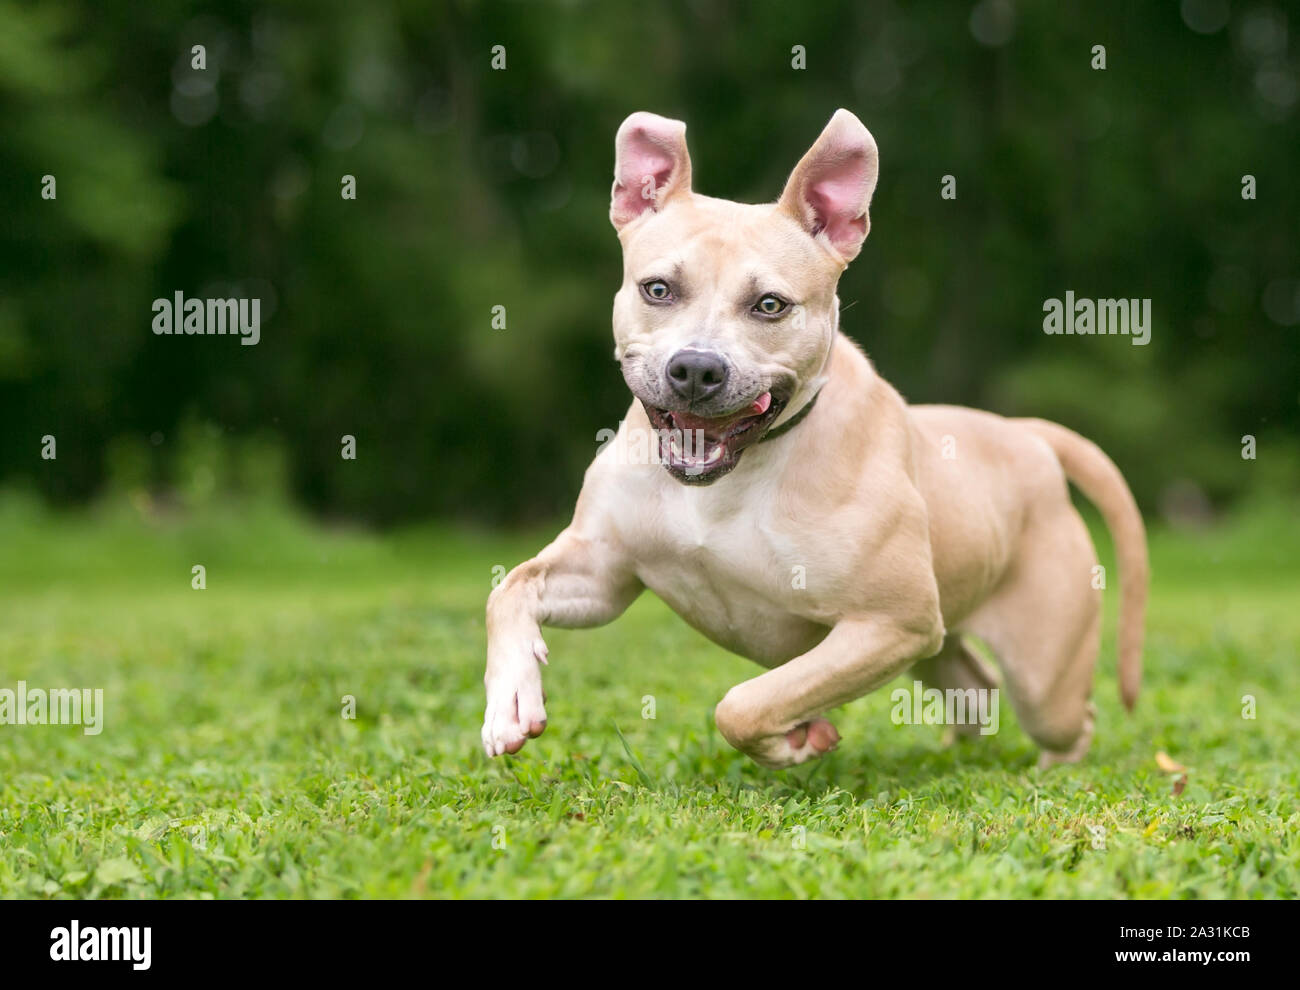 An excited Pit Bull Terrier mixed breed dog running outdoors with a happy expression Stock Photo